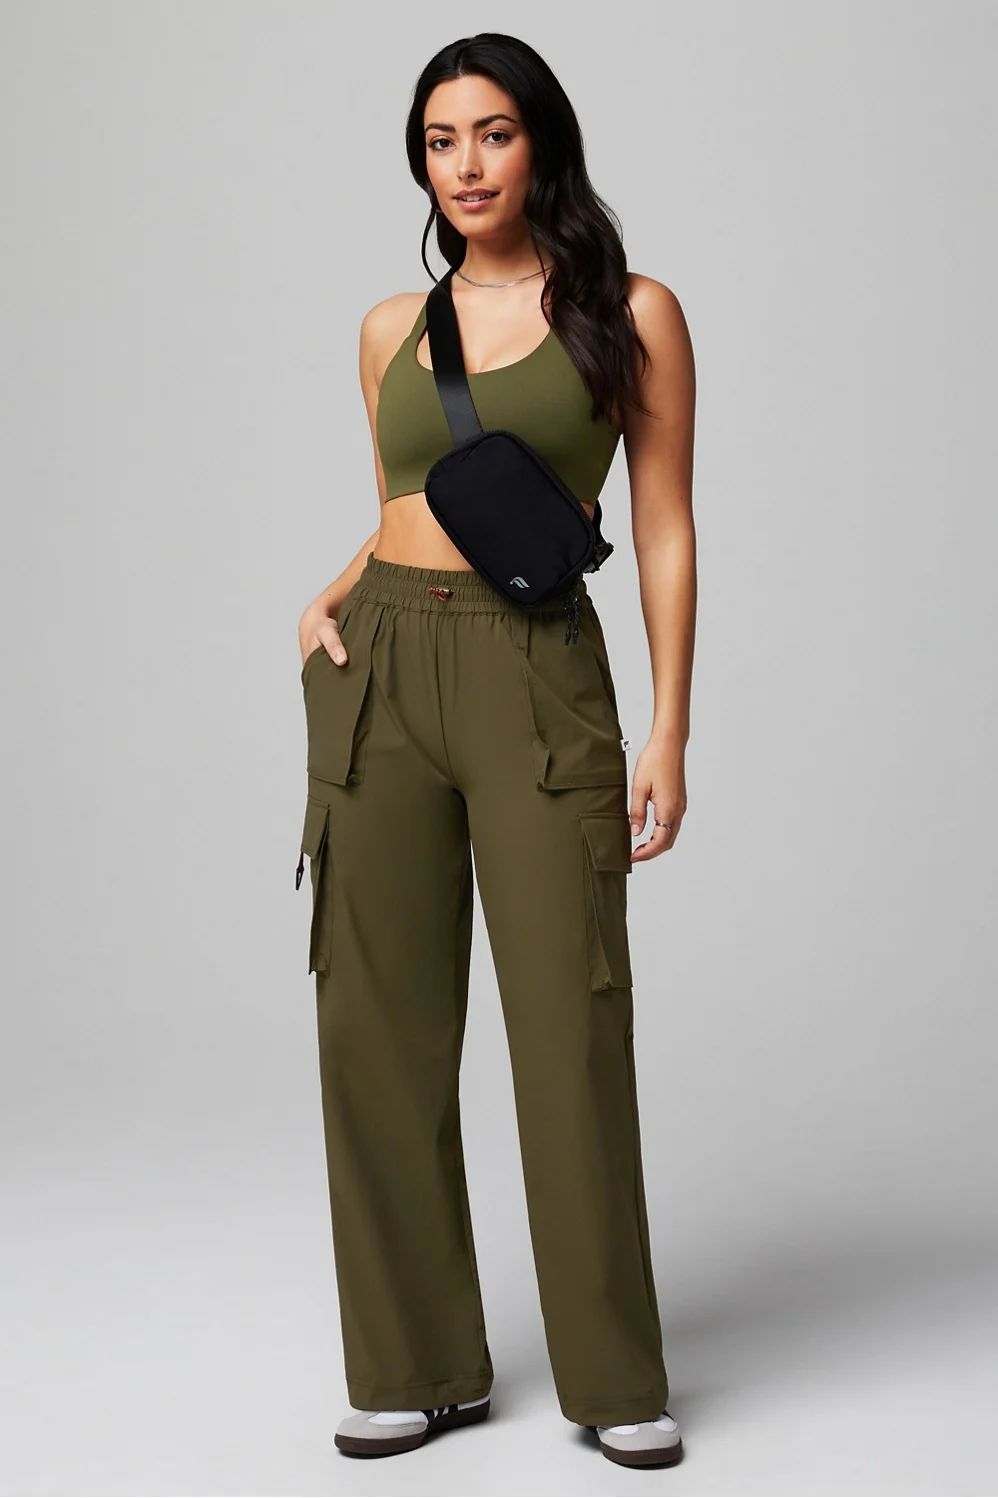 Wonder 2-Piece Outfit | Fabletics - North America